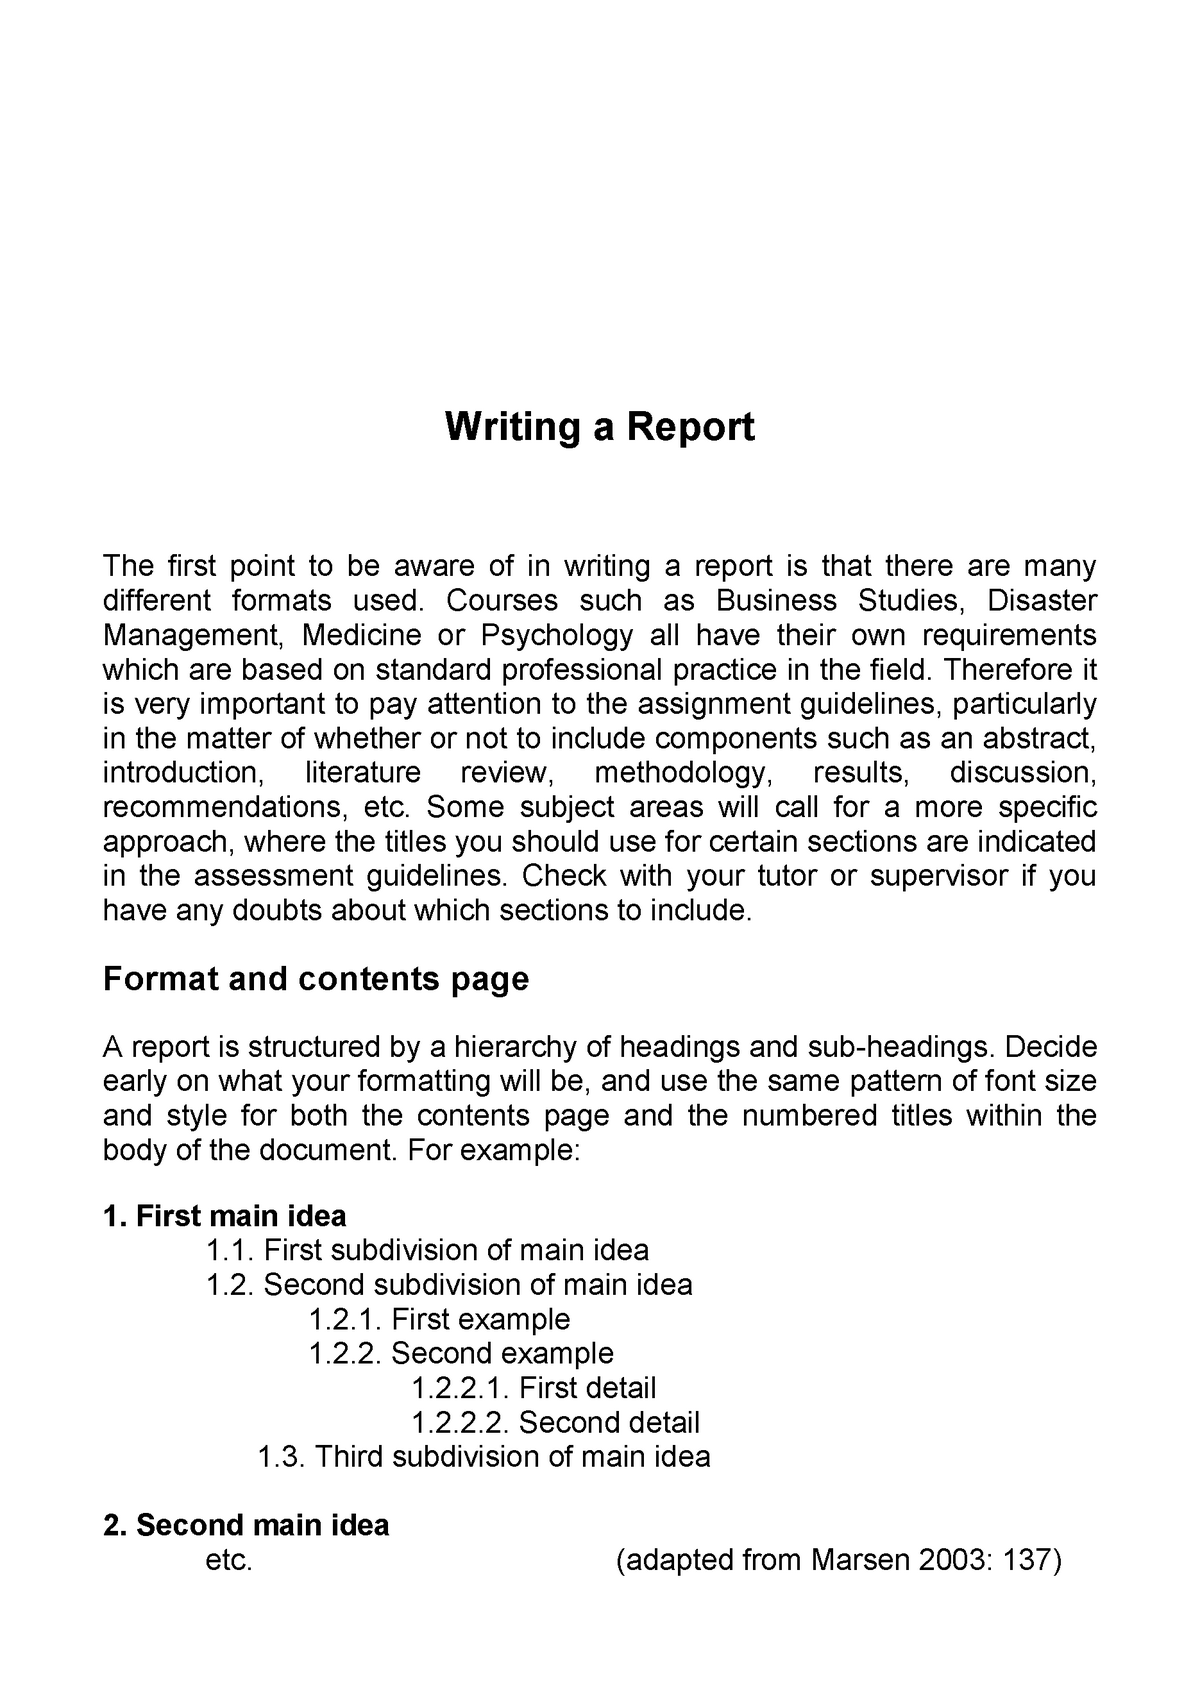 writing-a-report-academic-writing-2-developing-skill-in-academic